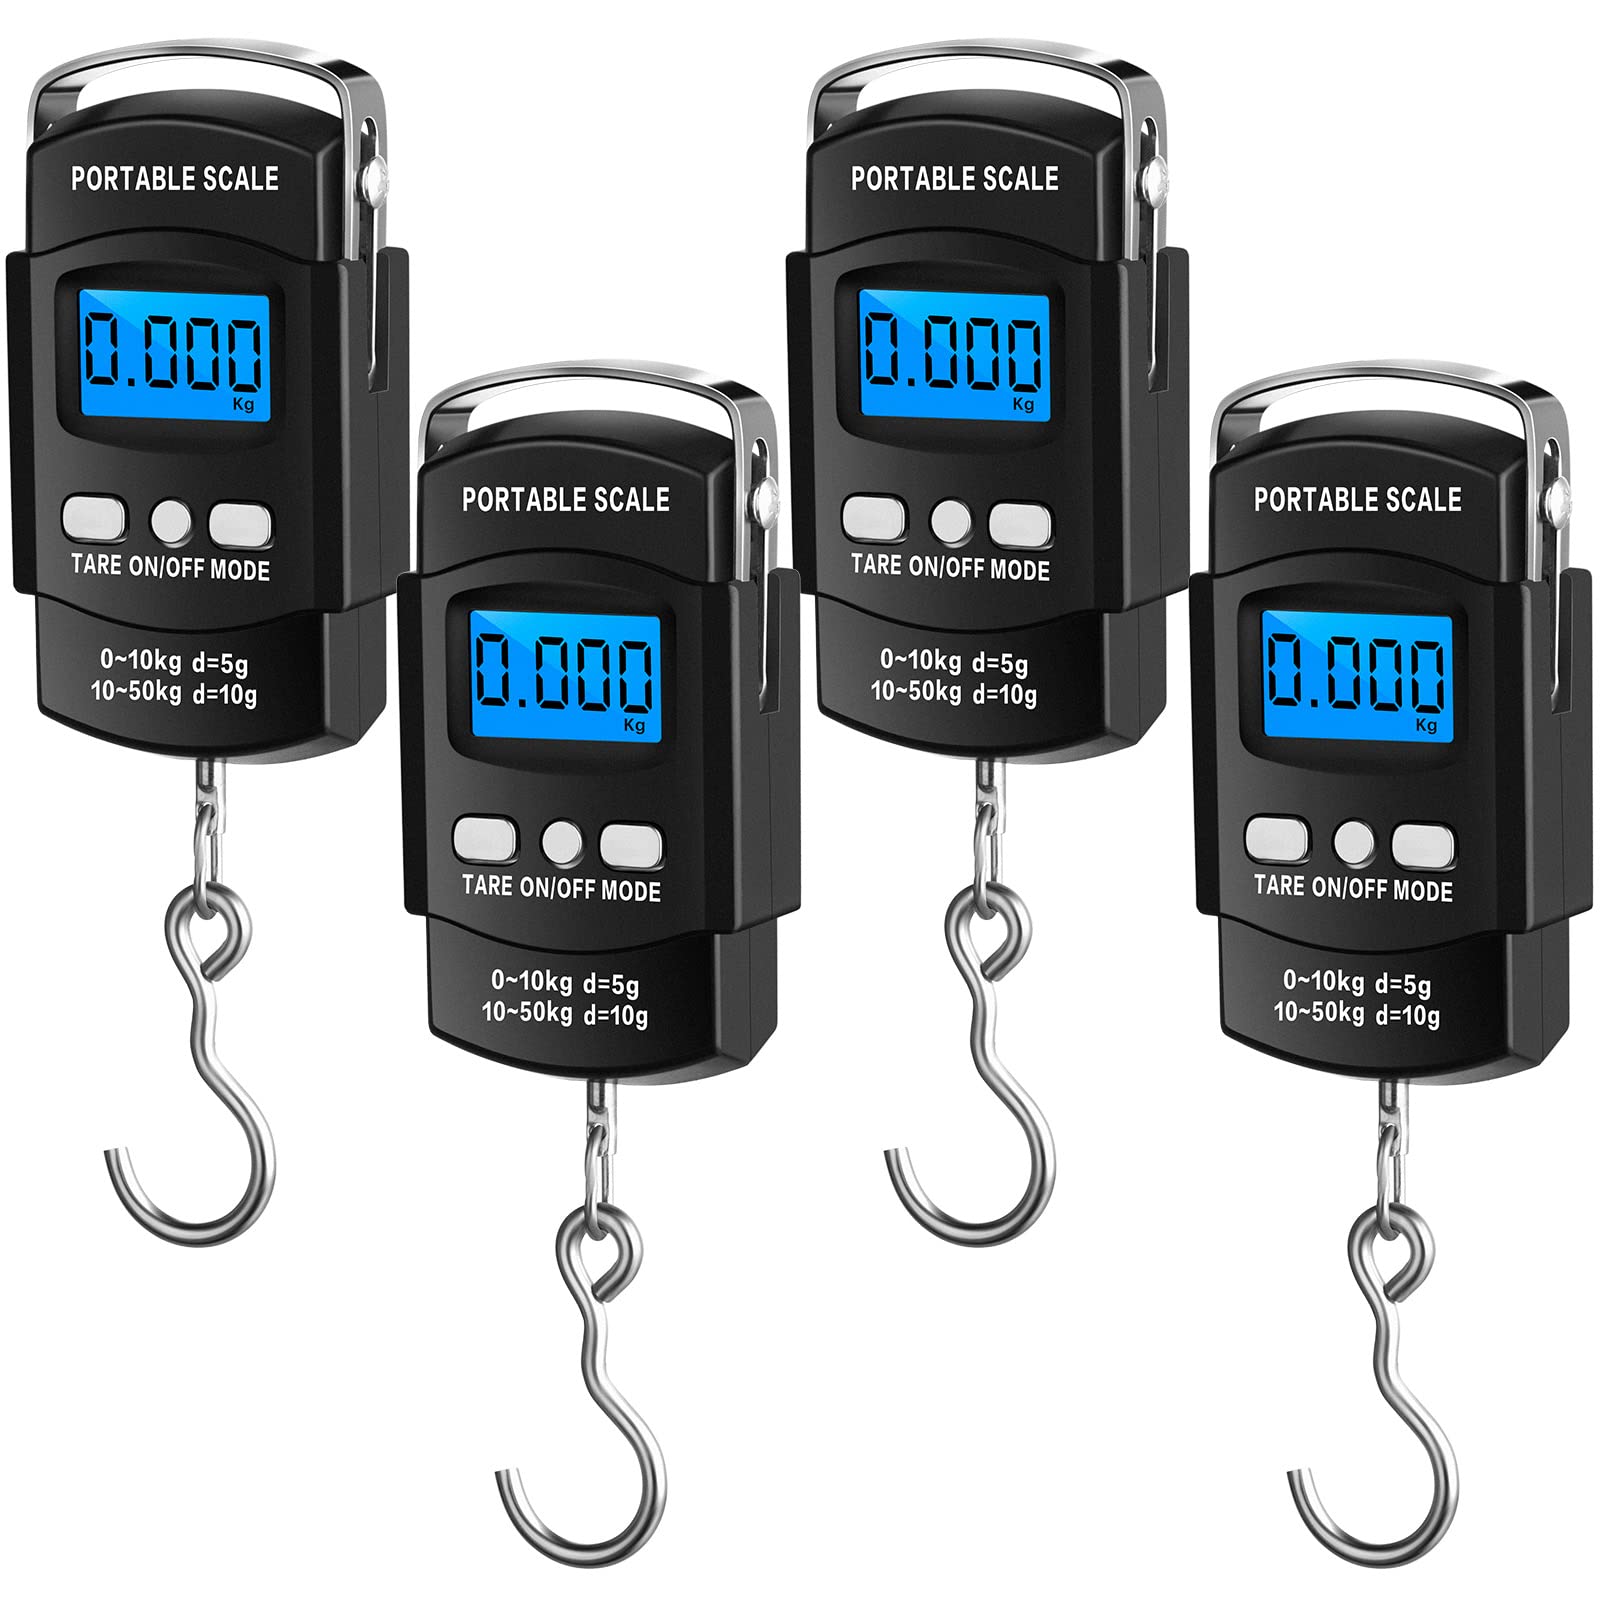 5 Core 110 Pounds Digital Hanging Luggage Scale with Backlit